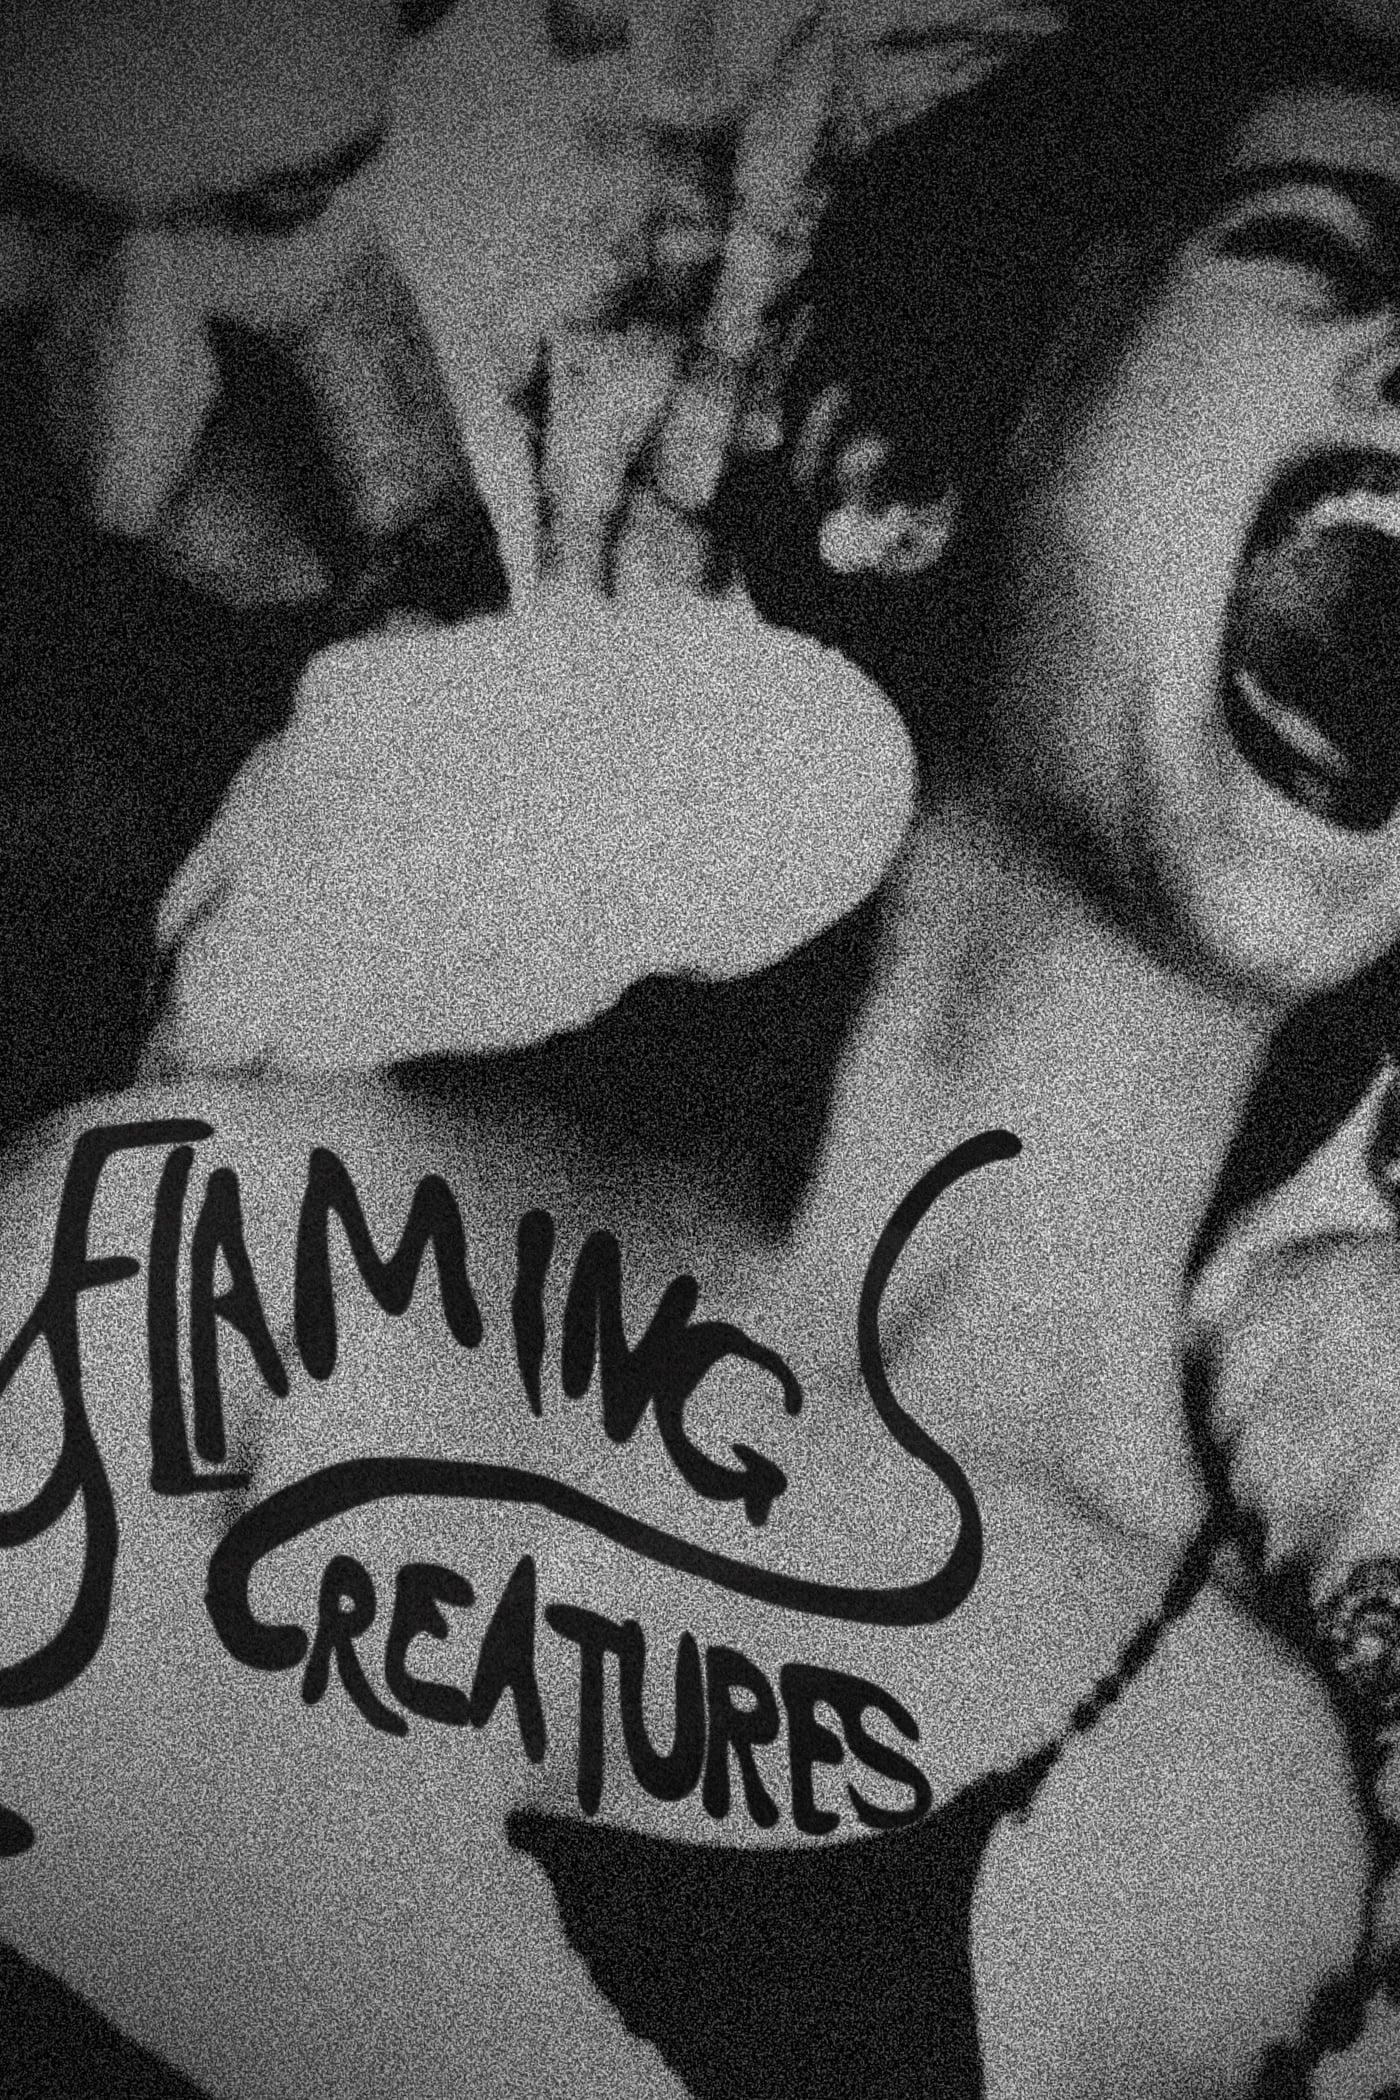 Flaming Creatures poster